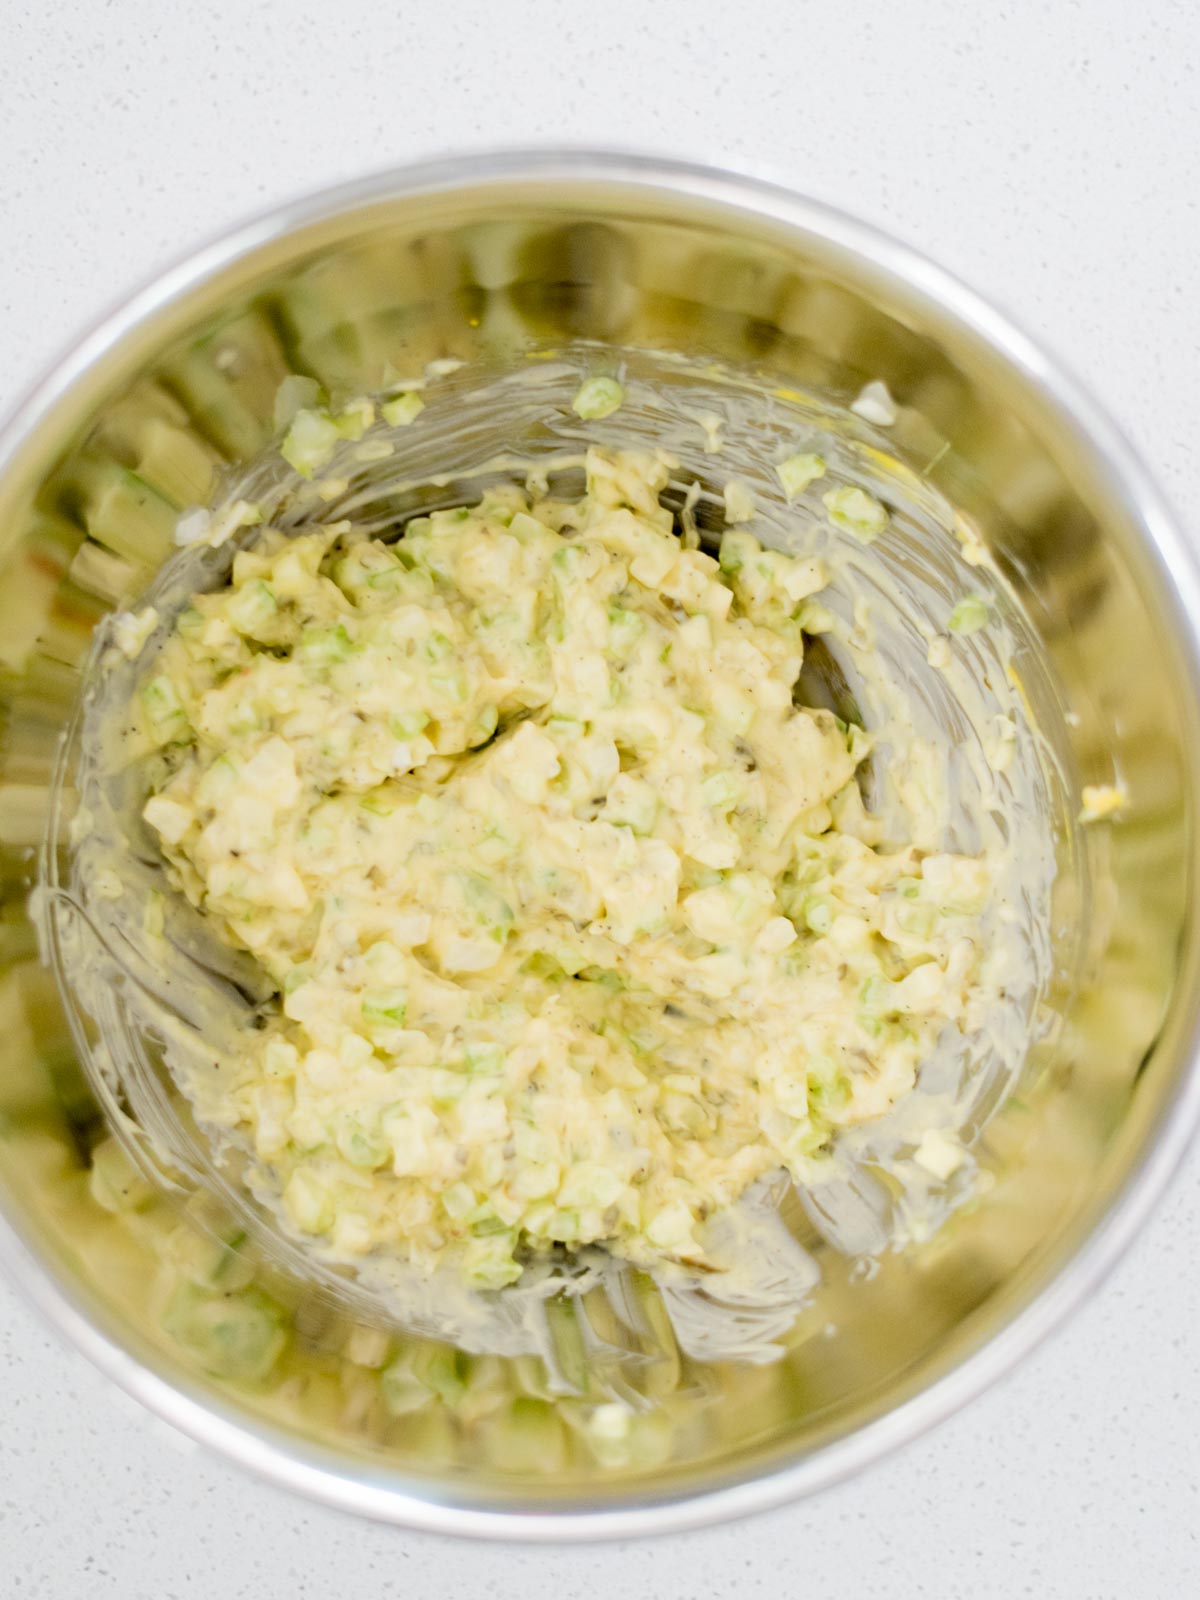 celery and onion mixed together with potato salad dressing